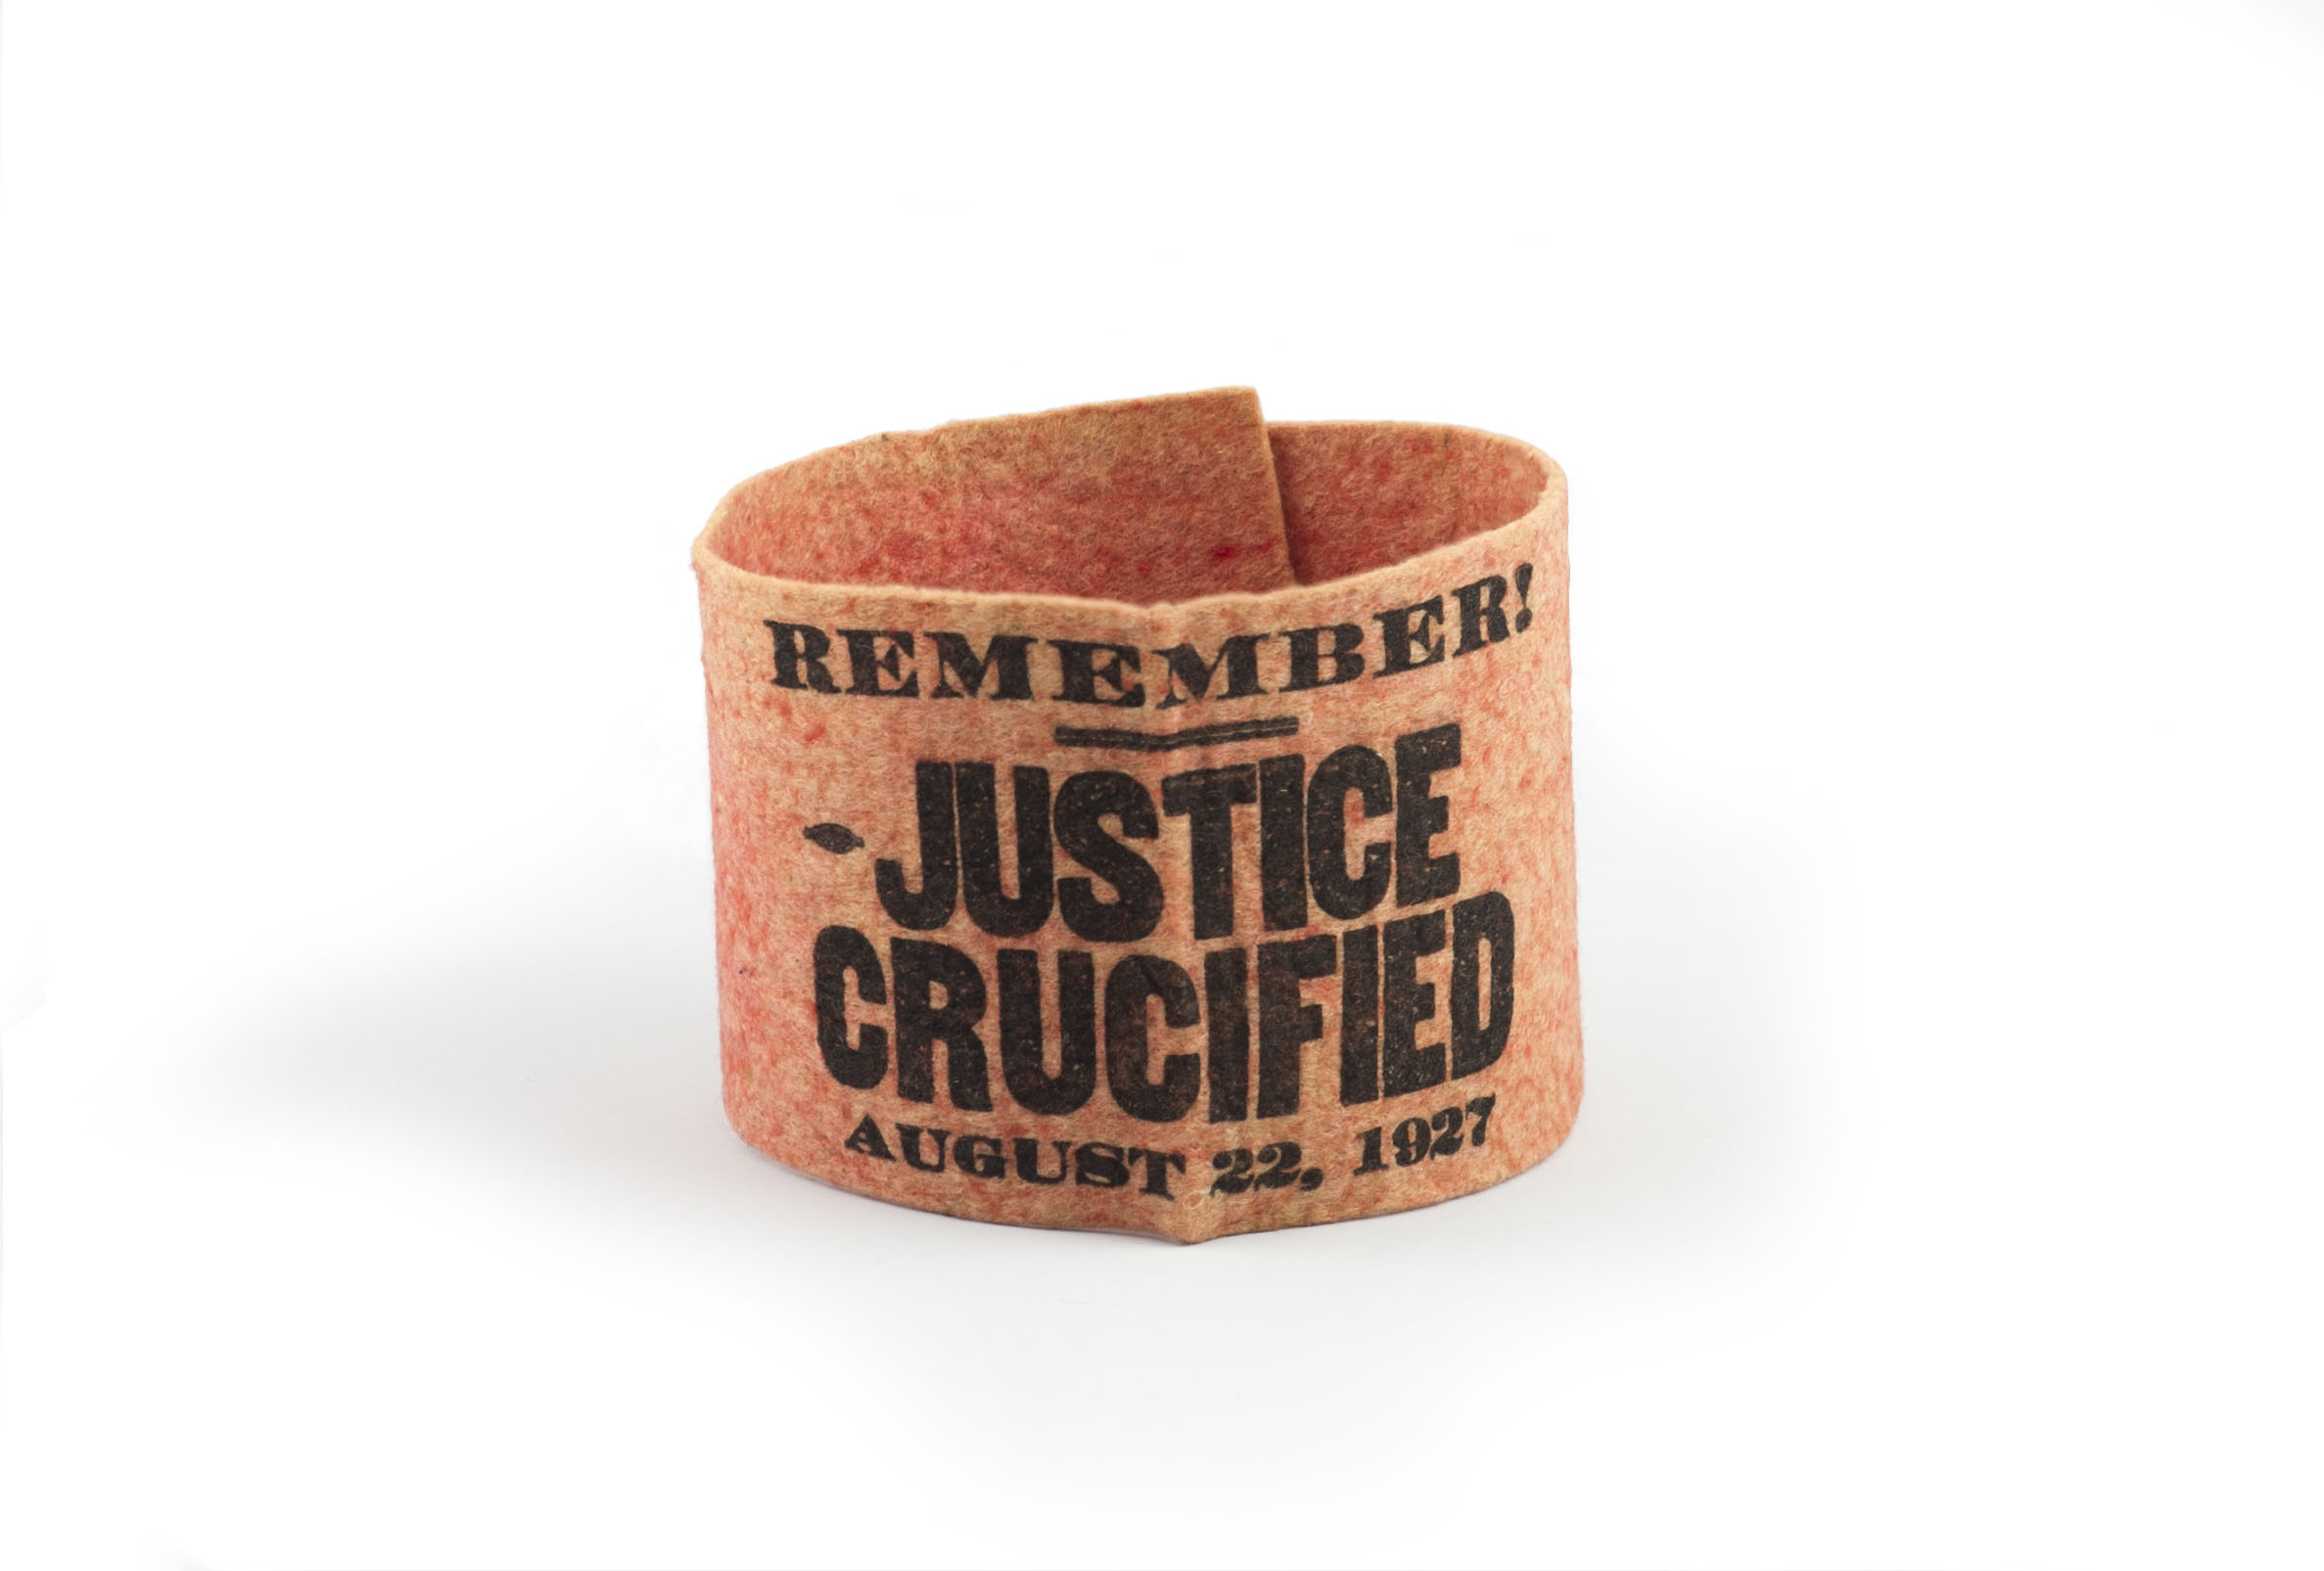 One of the red arm bands worn by mourners at Sacco and Vanzetti’s funeral